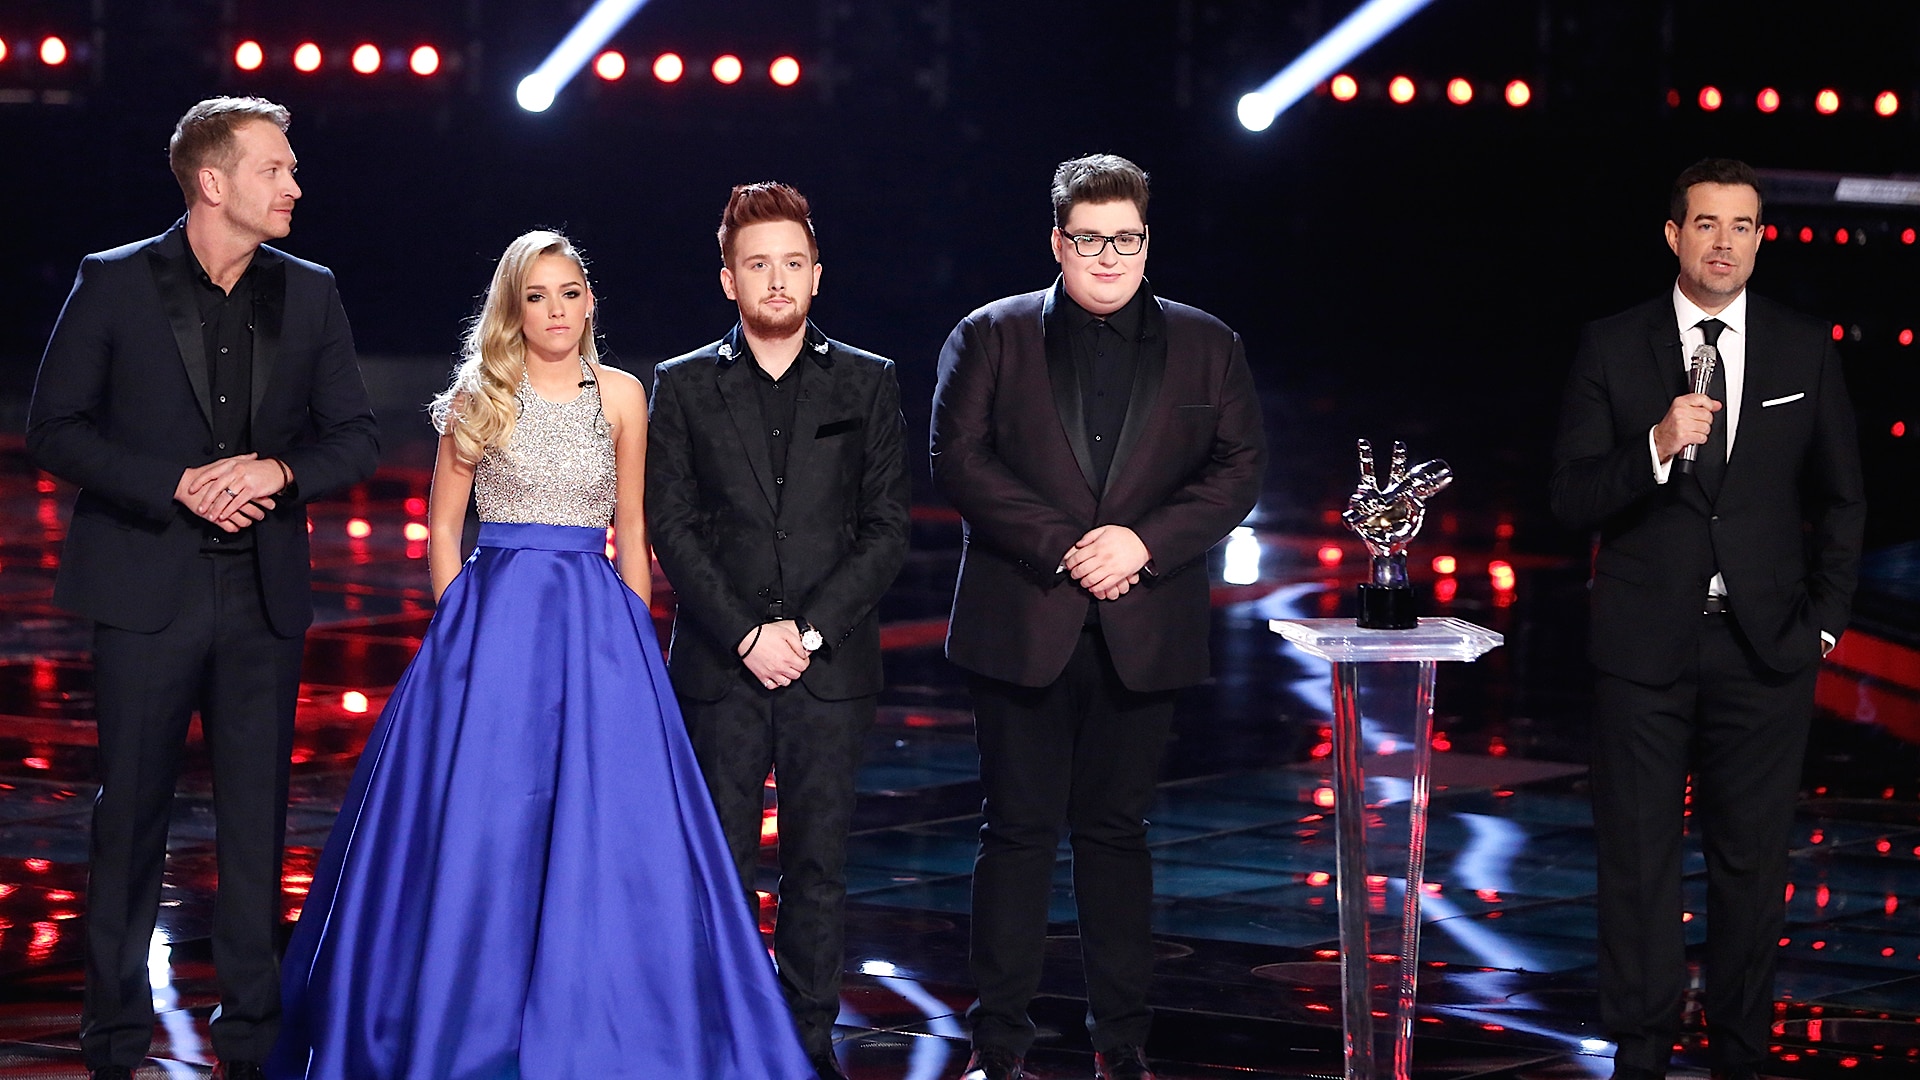 Watch The Voice Highlight The New Voice Champion Is...